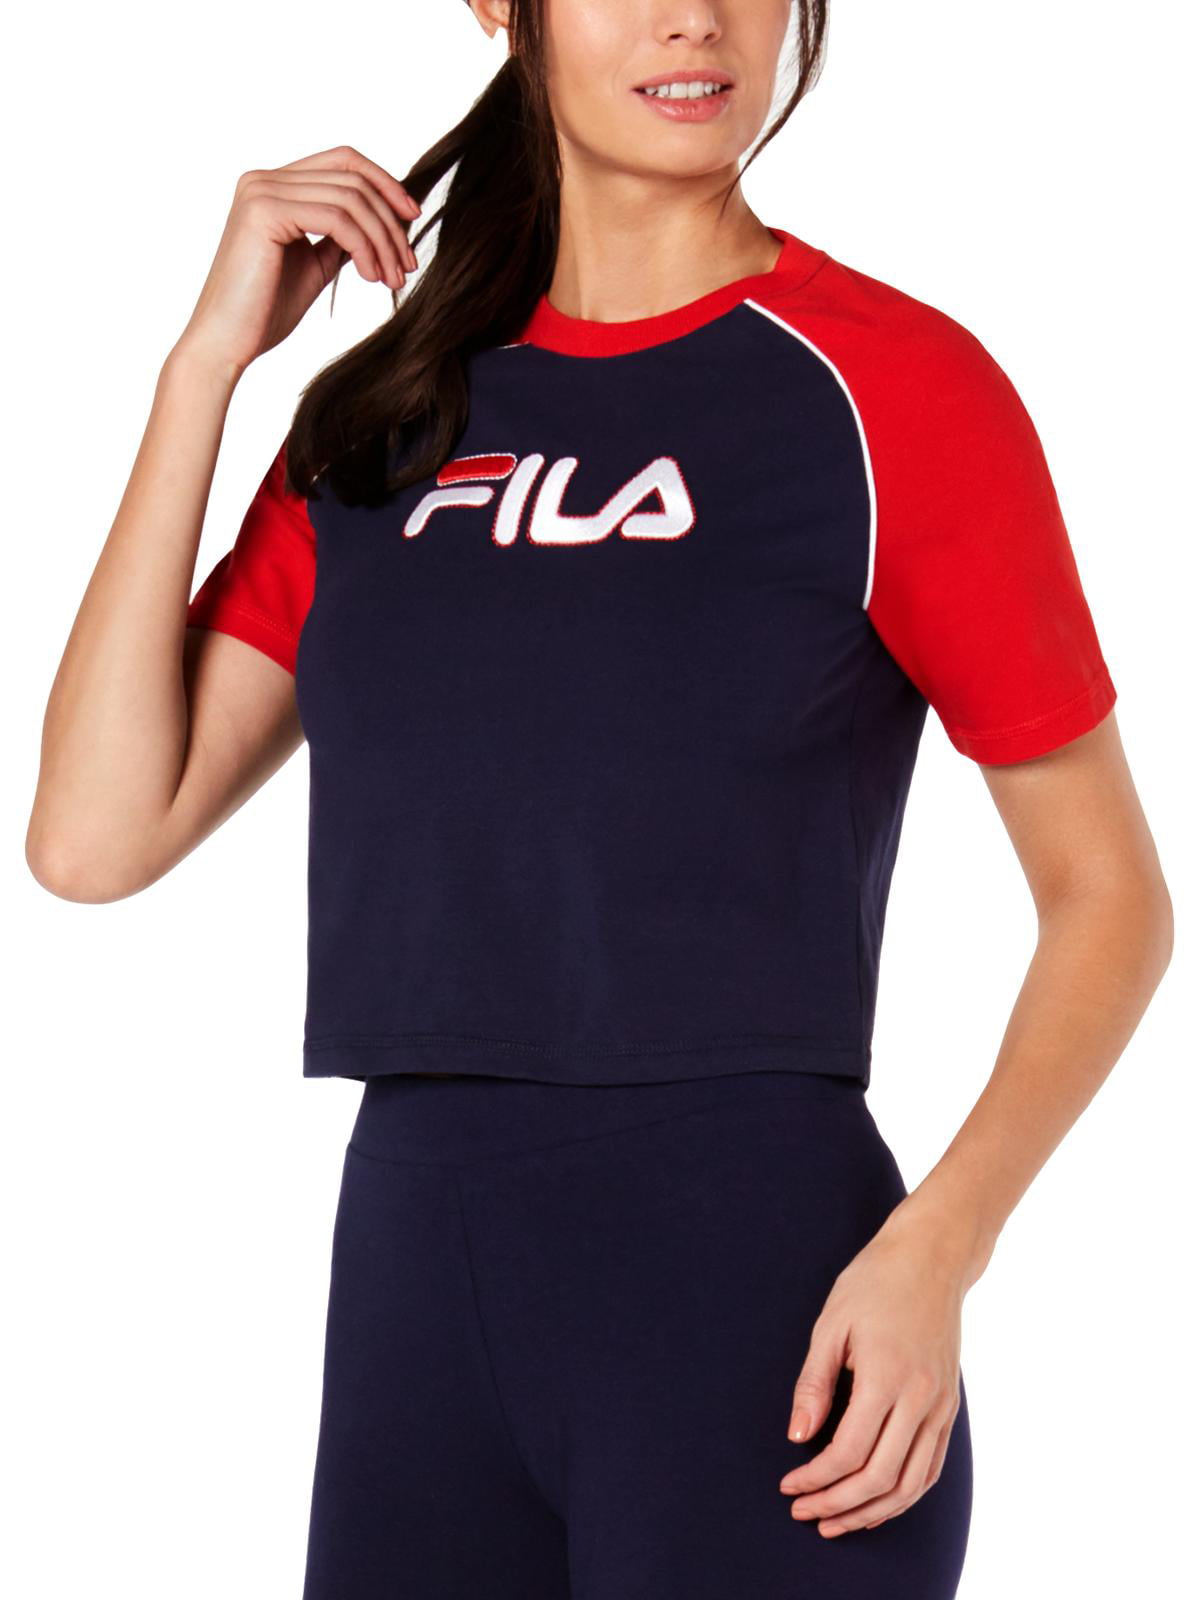 FILA Womens Activewear in Womens Clothing 